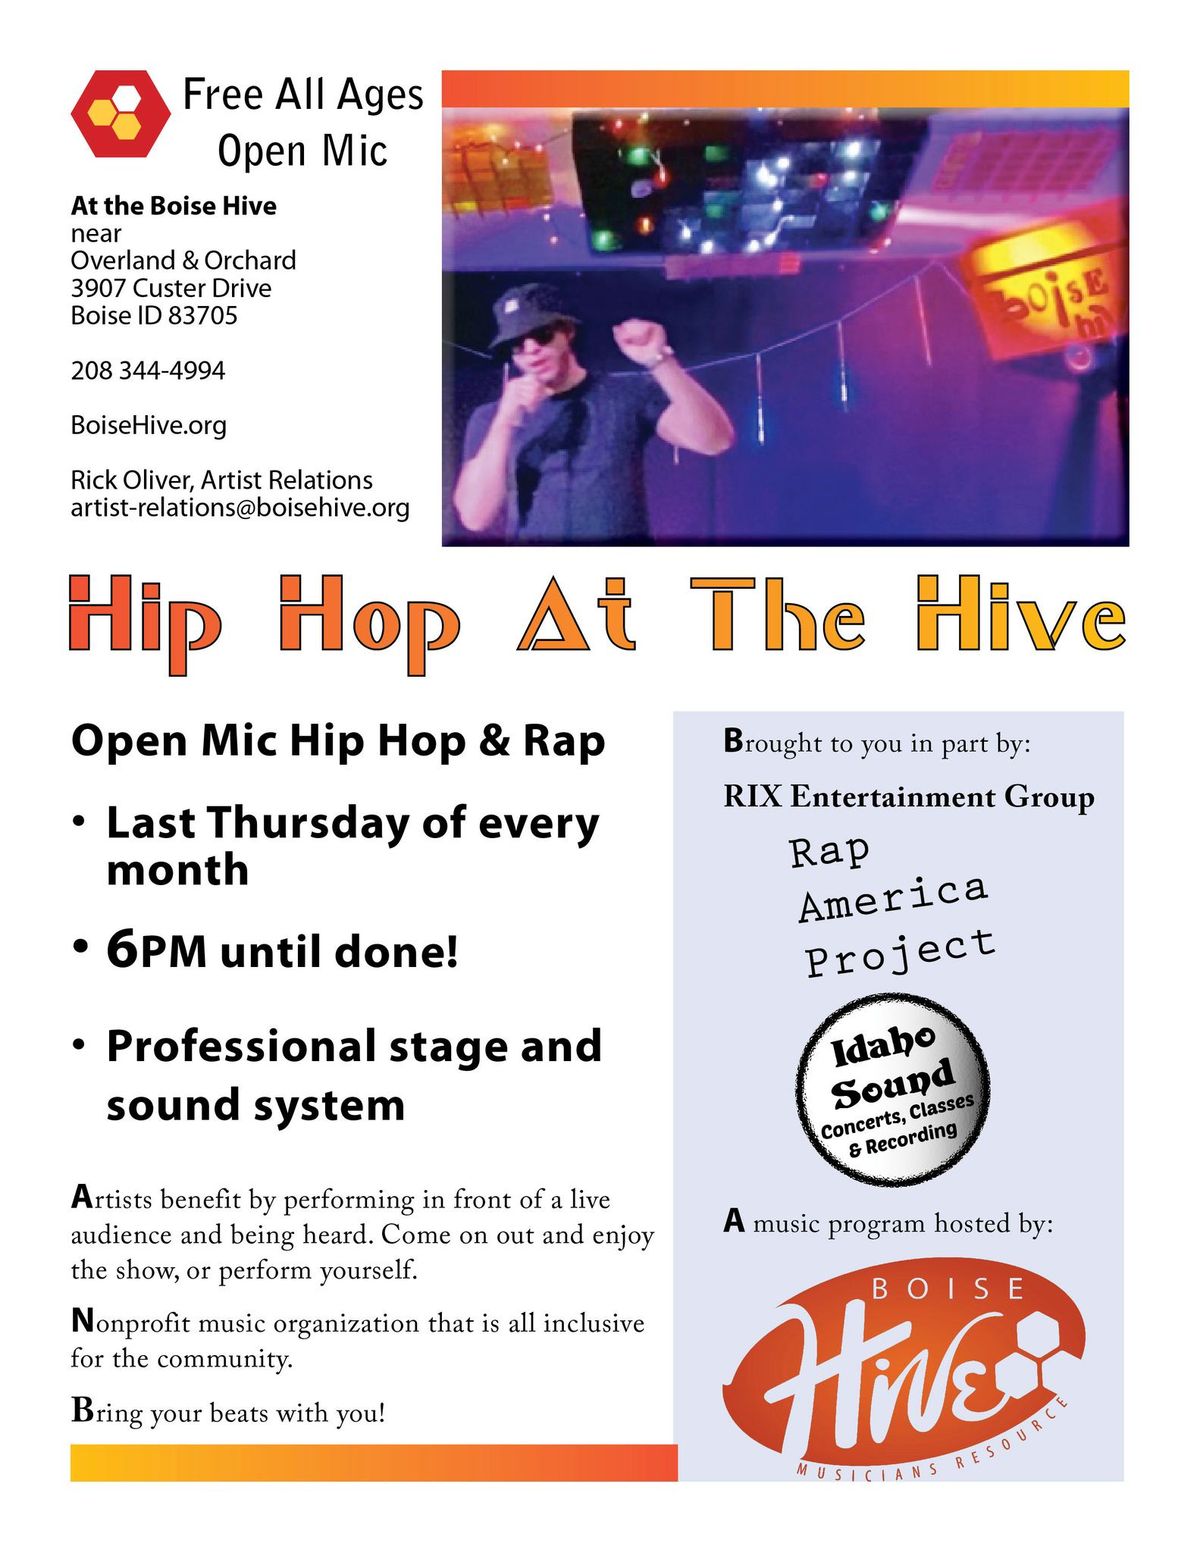 Hip Hop at the Hive